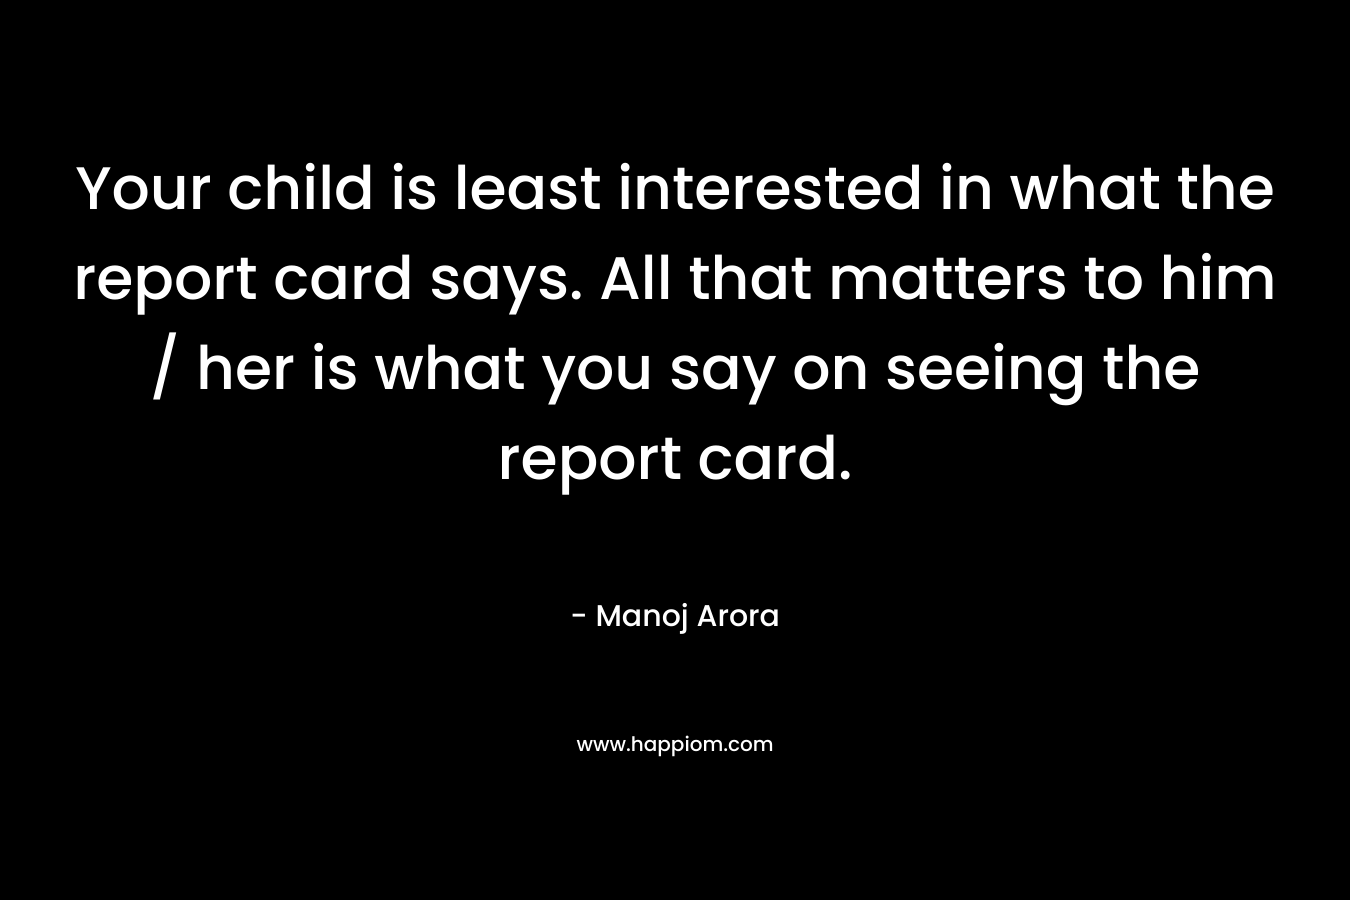 Your child is least interested in what the report card says. All that matters to him / her is what you say on seeing the report card. – Manoj Arora